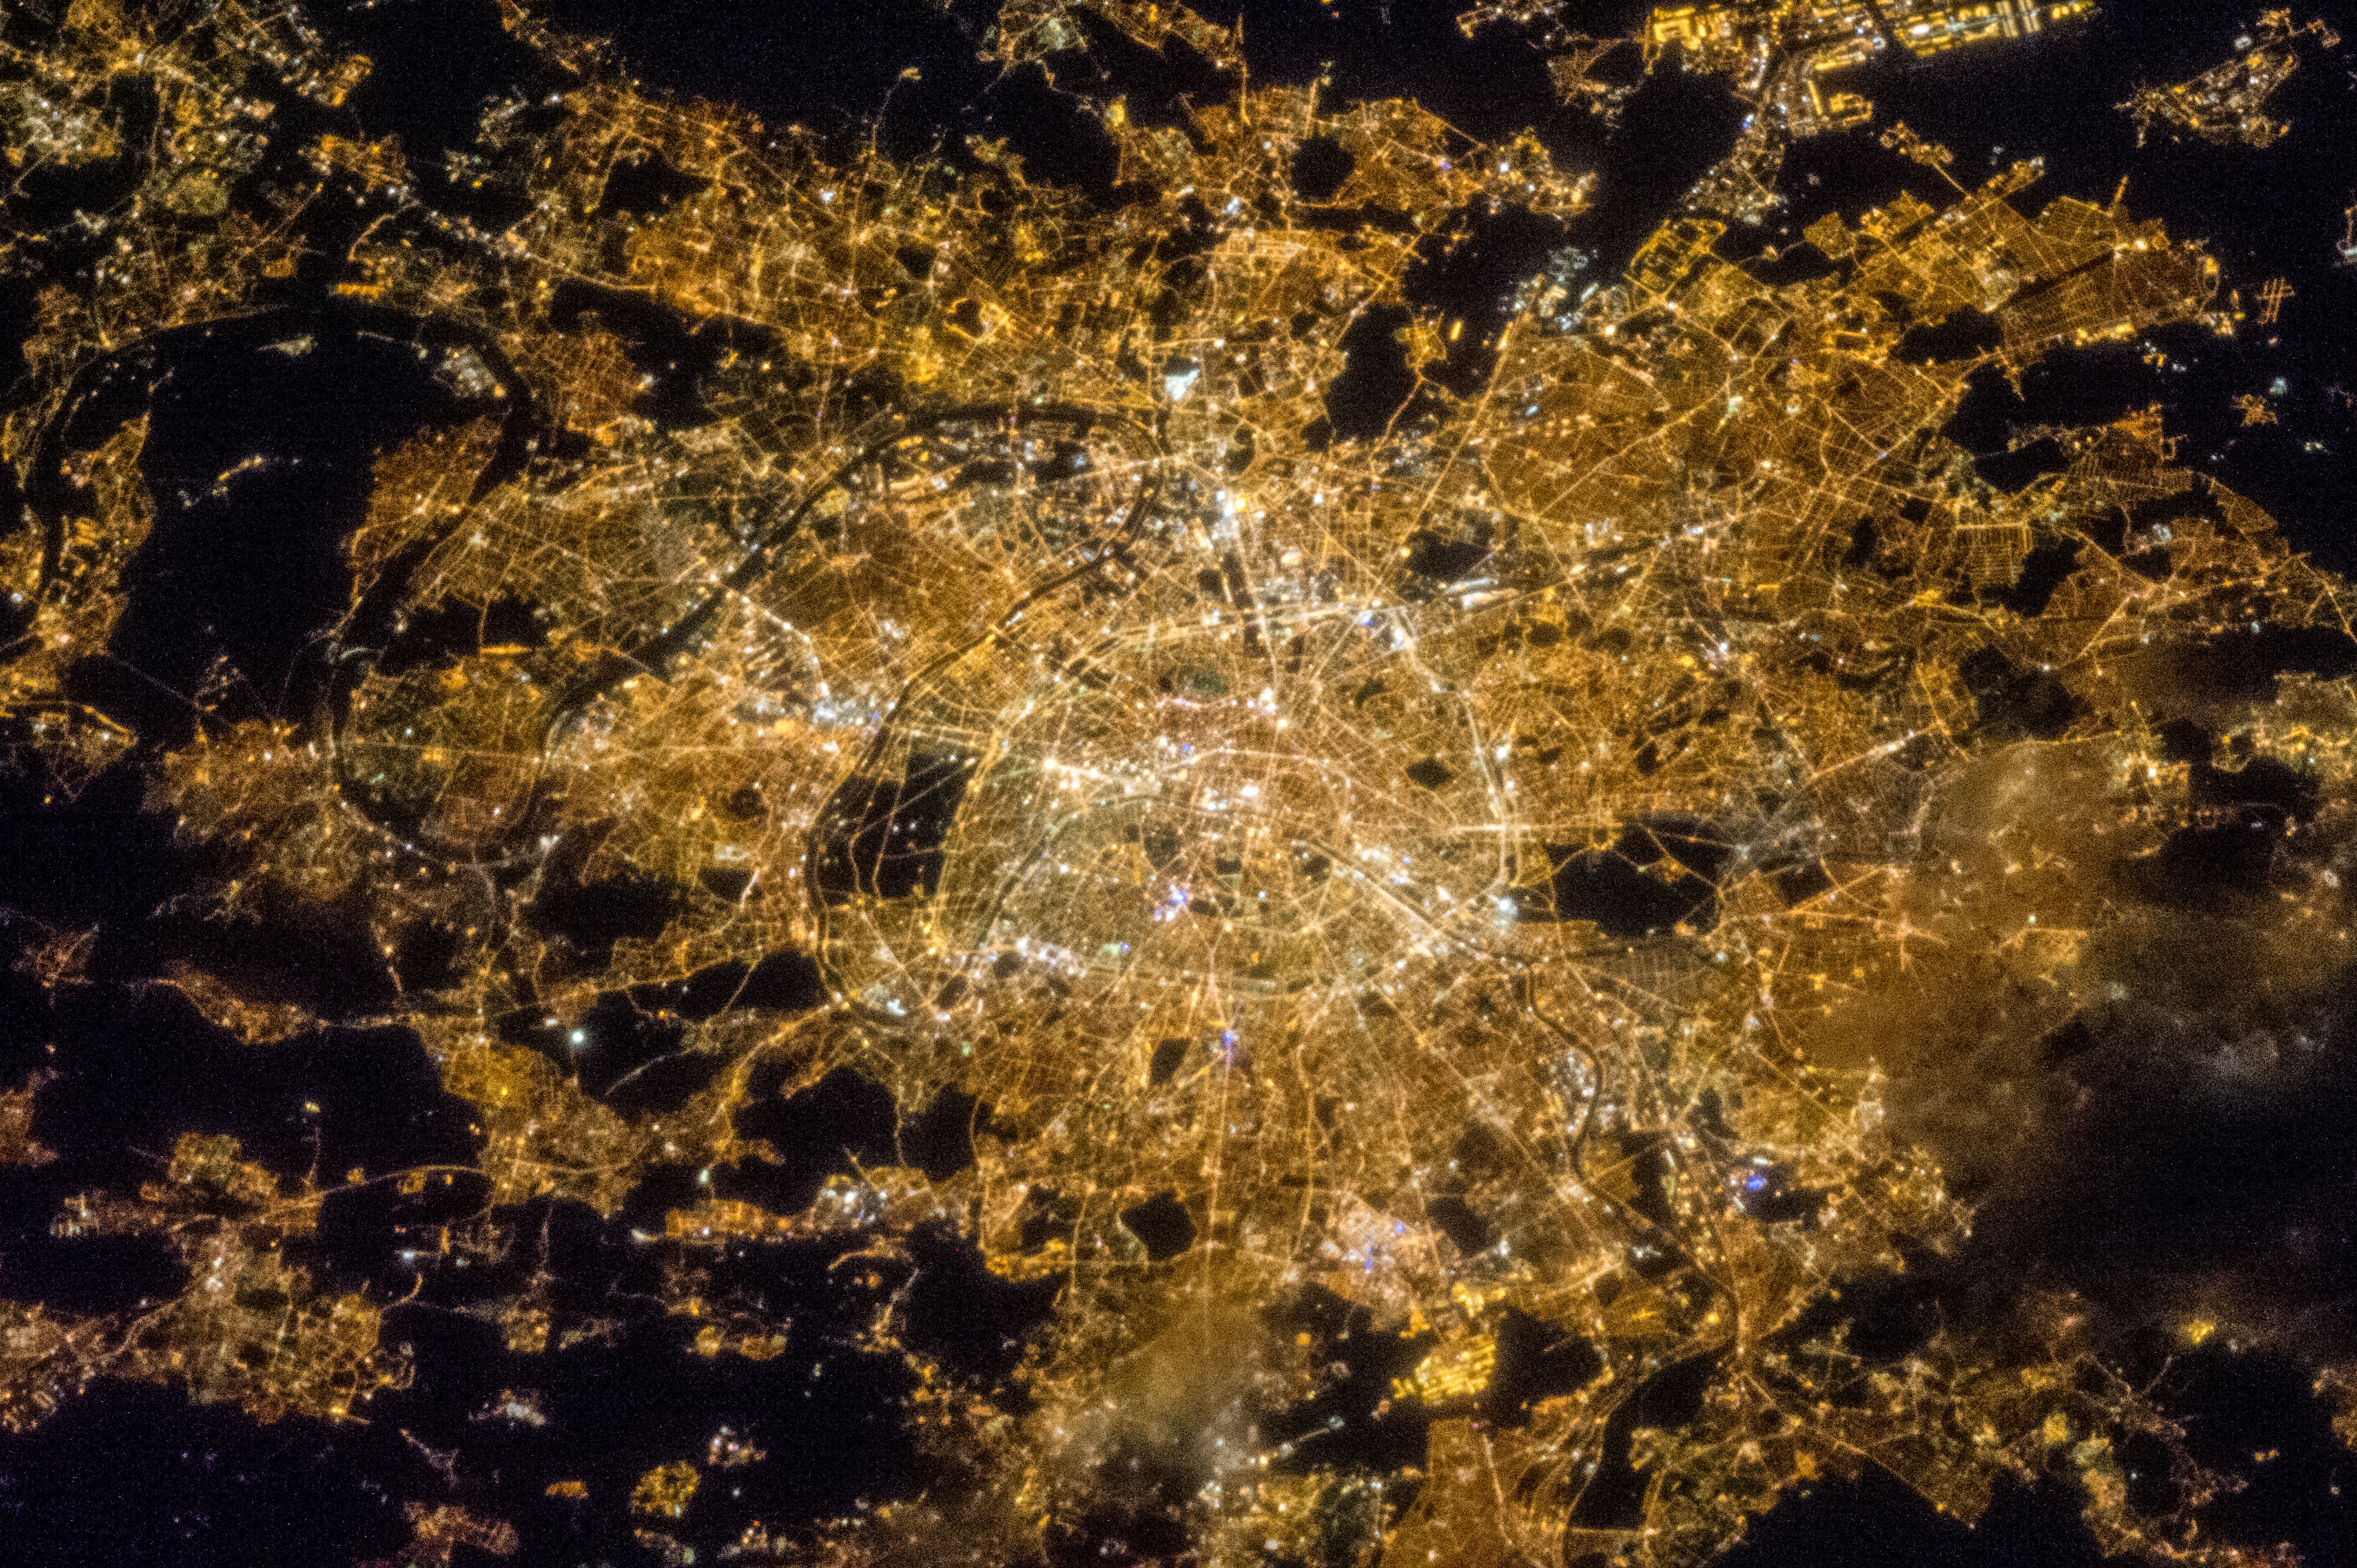 Photo: Paris At Night From Space - SpaceRef